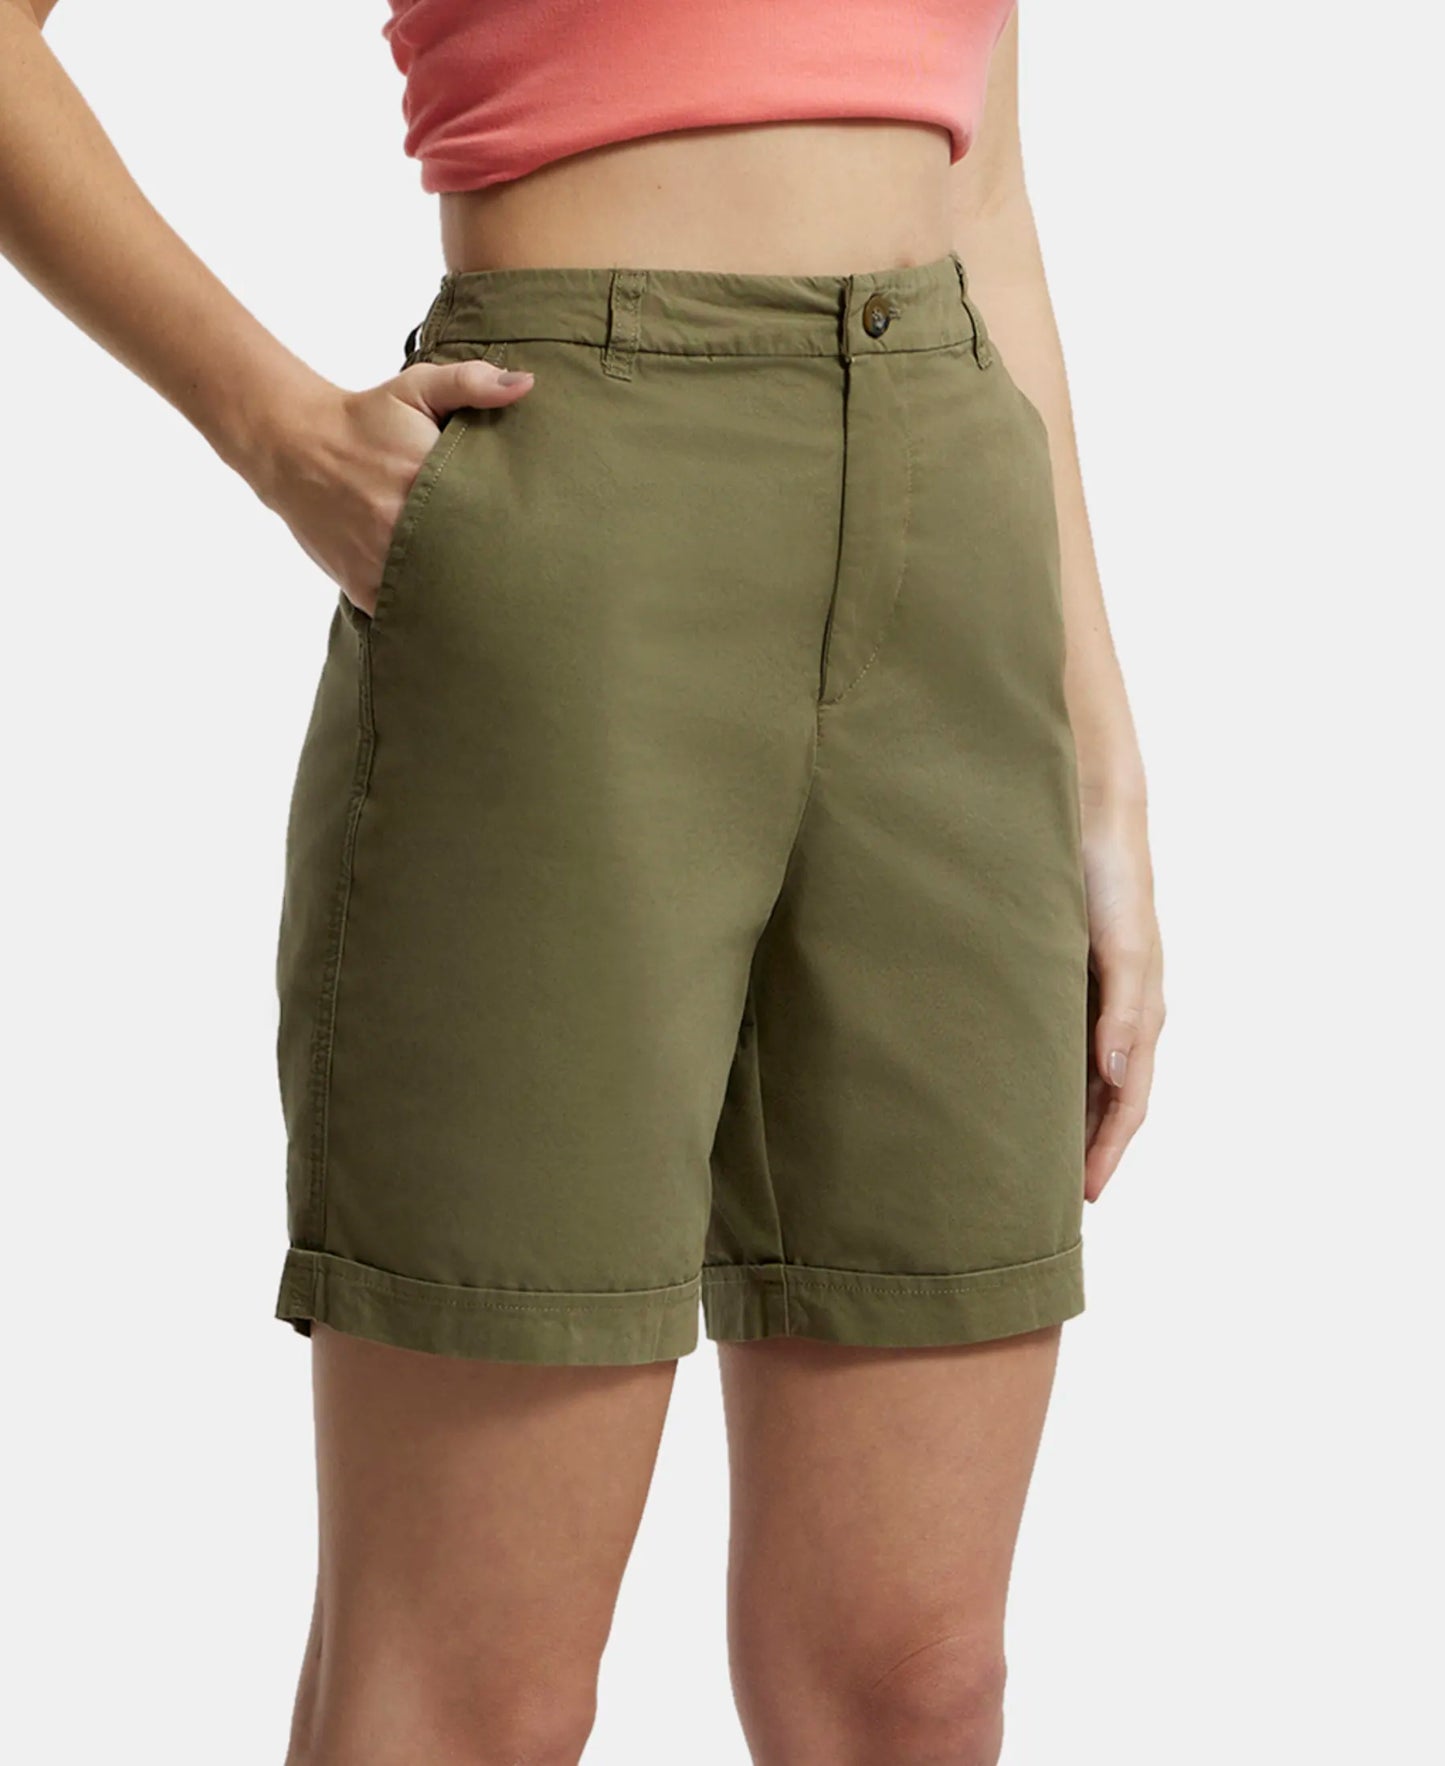 Super Combed Cotton Woven Twill Fabric Relaxed Fit Shorts with Convenient Side Pockets - Burnt Olive-2